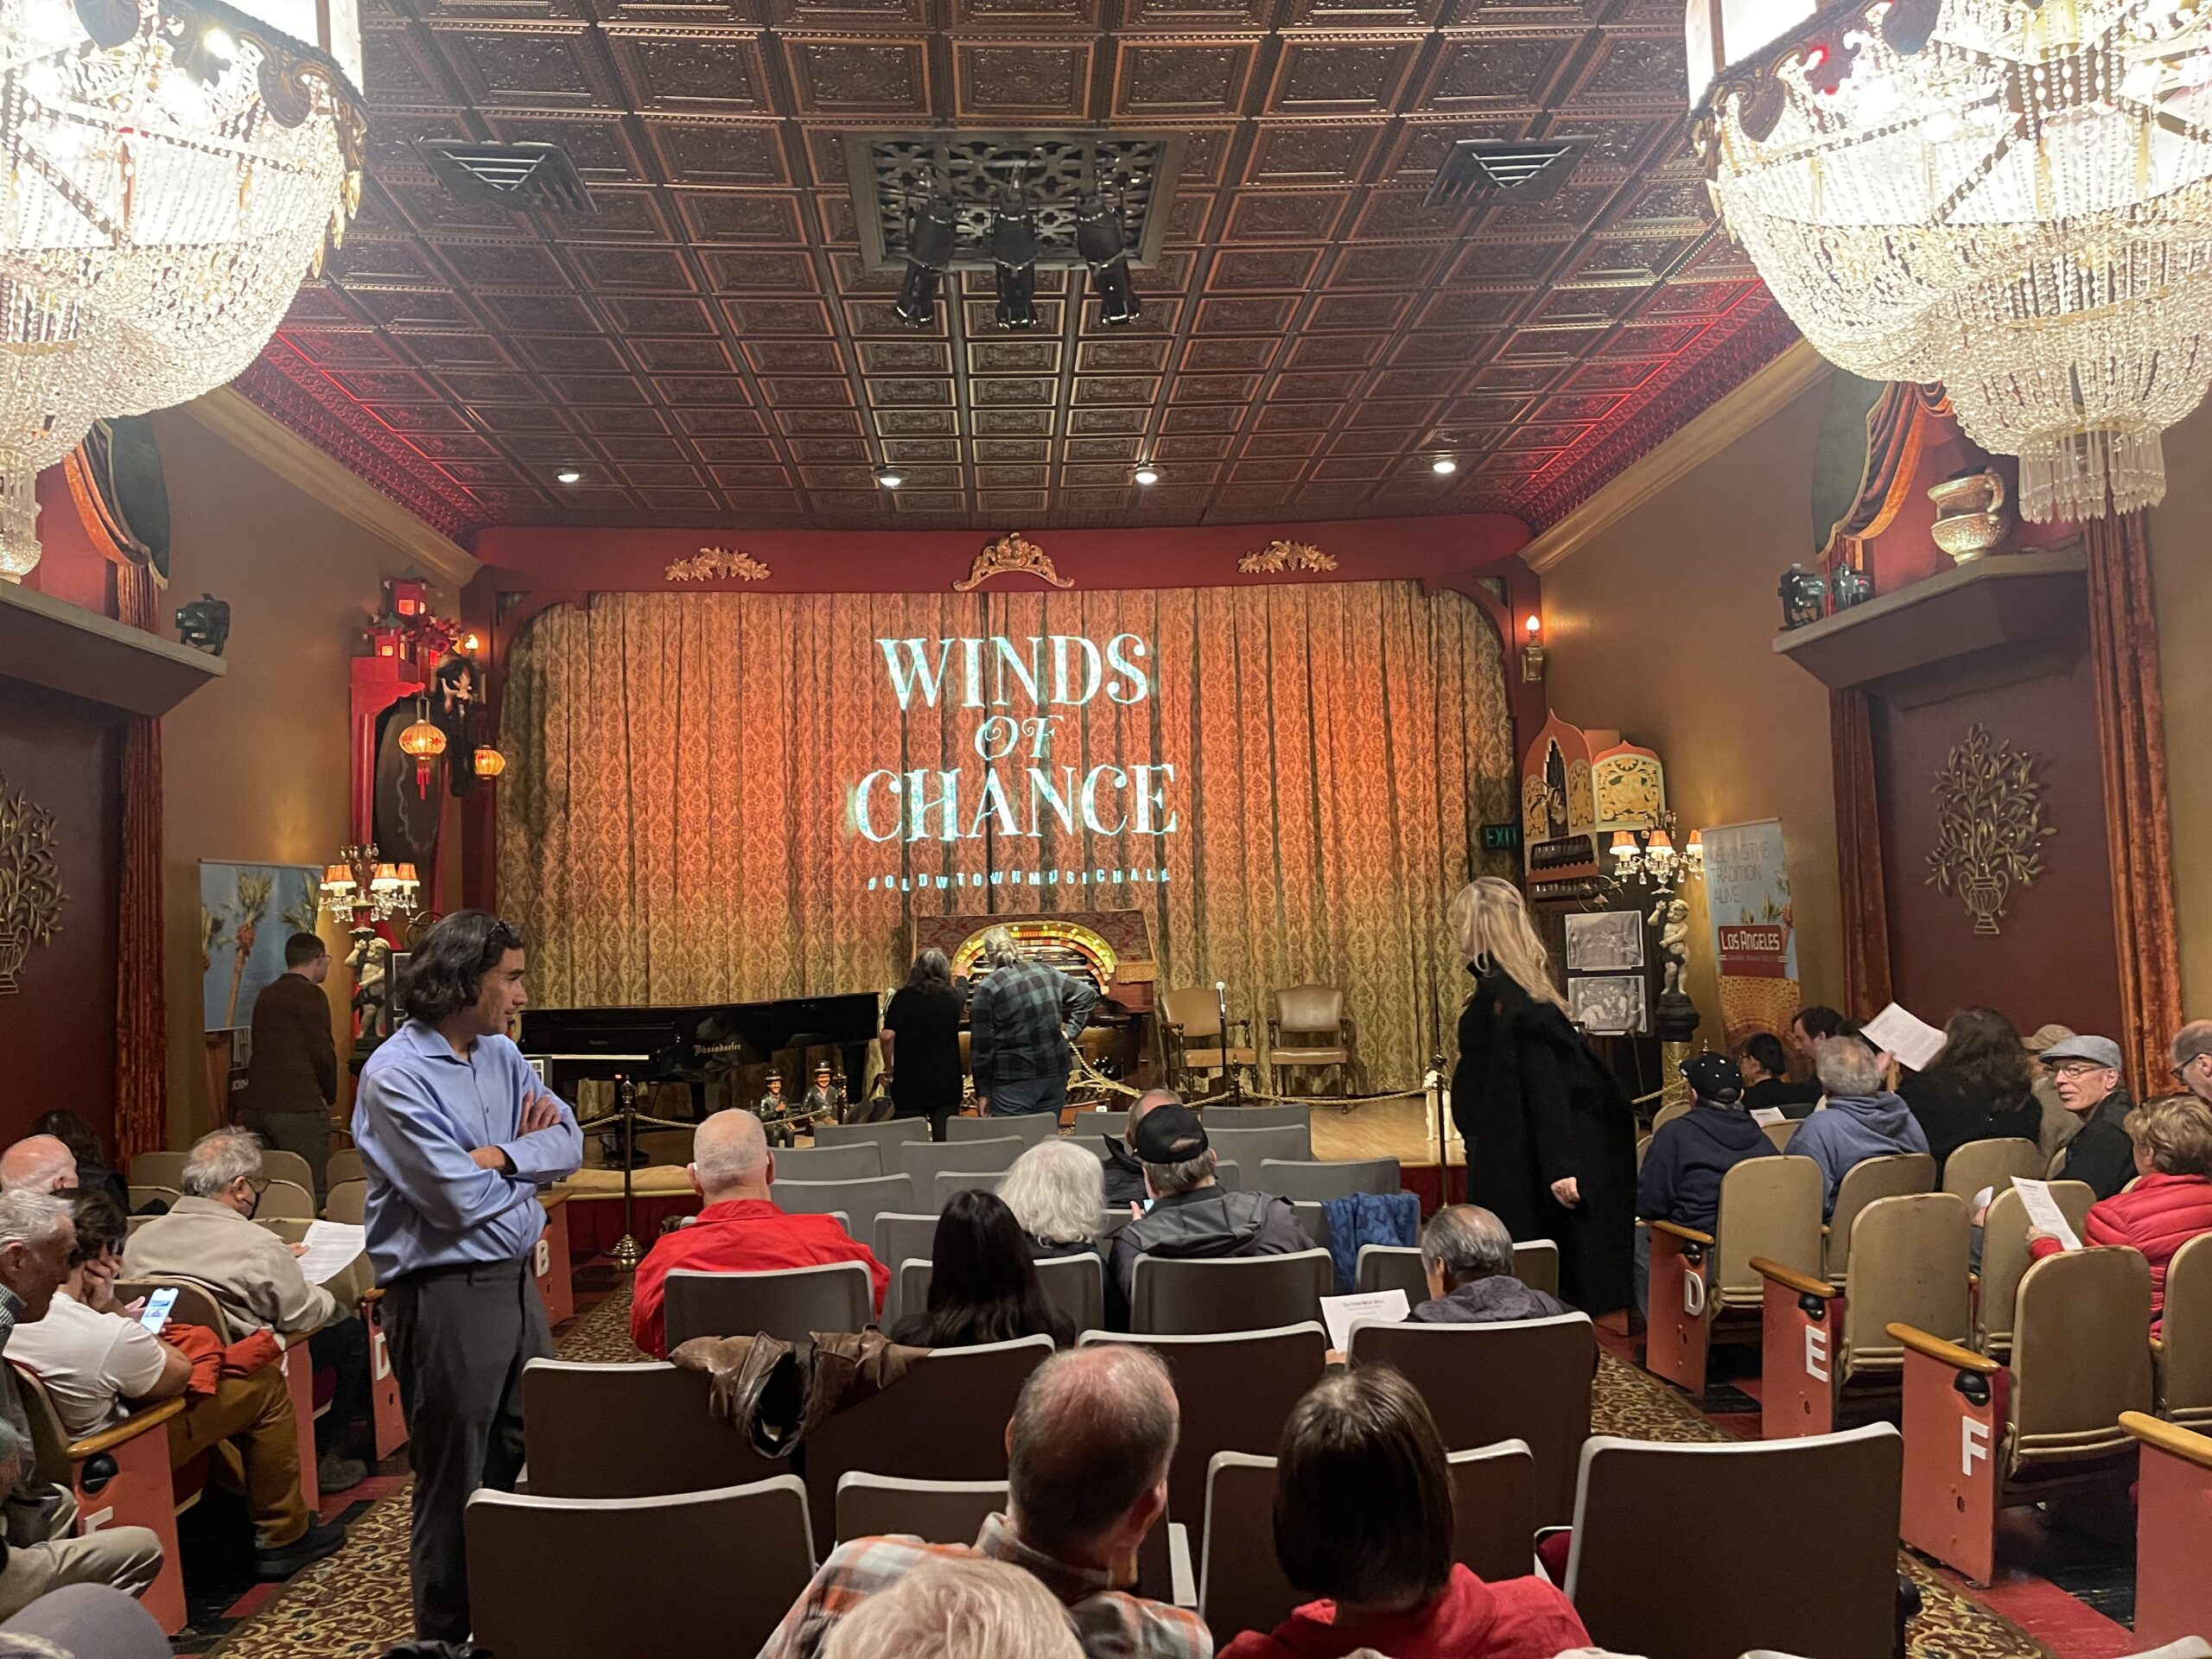 Winds of Chance at Old Town Music Hall